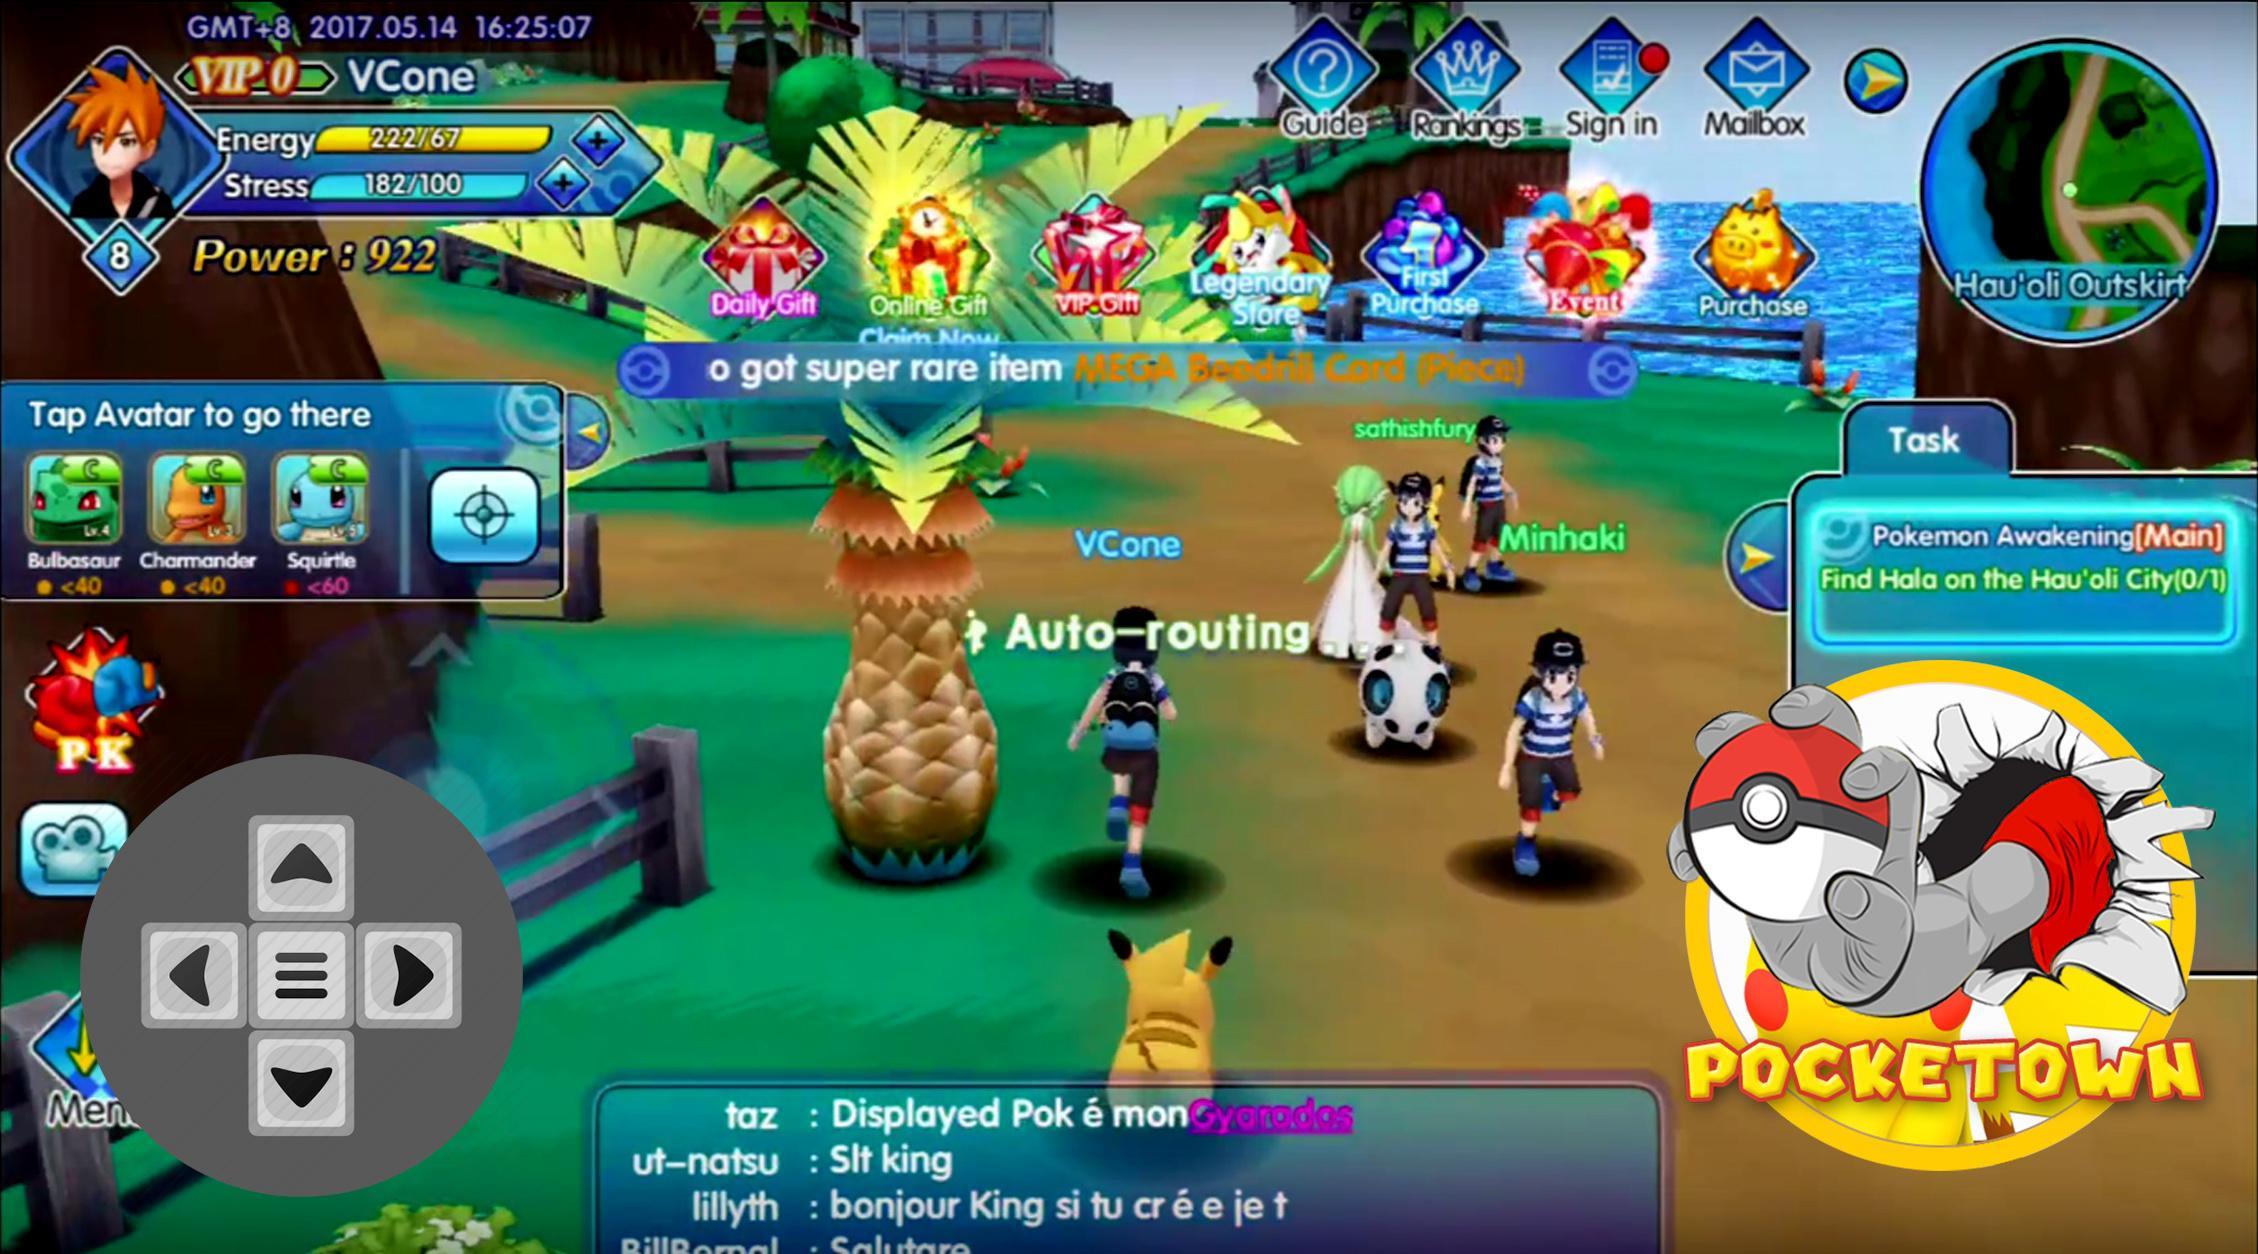 Pokemon pocketown legendary game download for android pc